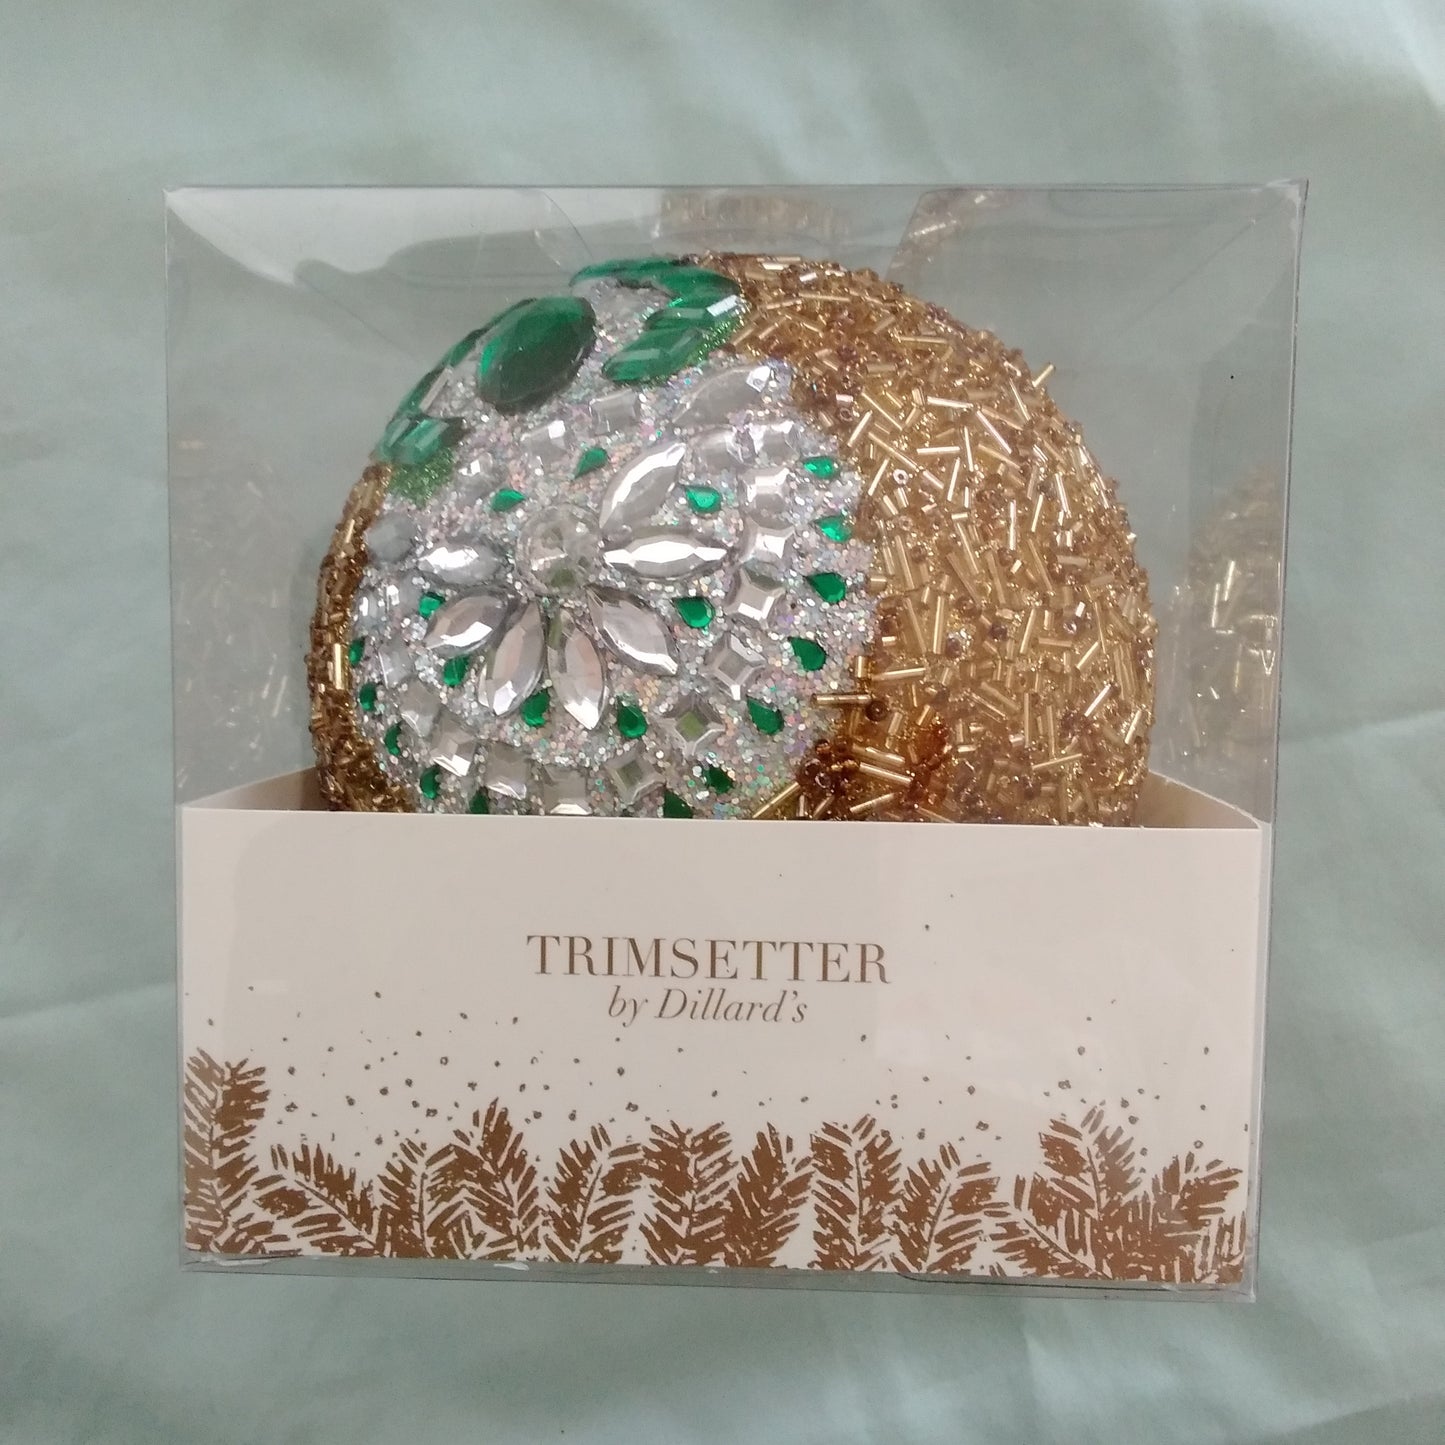 Trimsetter by Dillard's Large Gold Ornament with White and Green Crystal Snowman